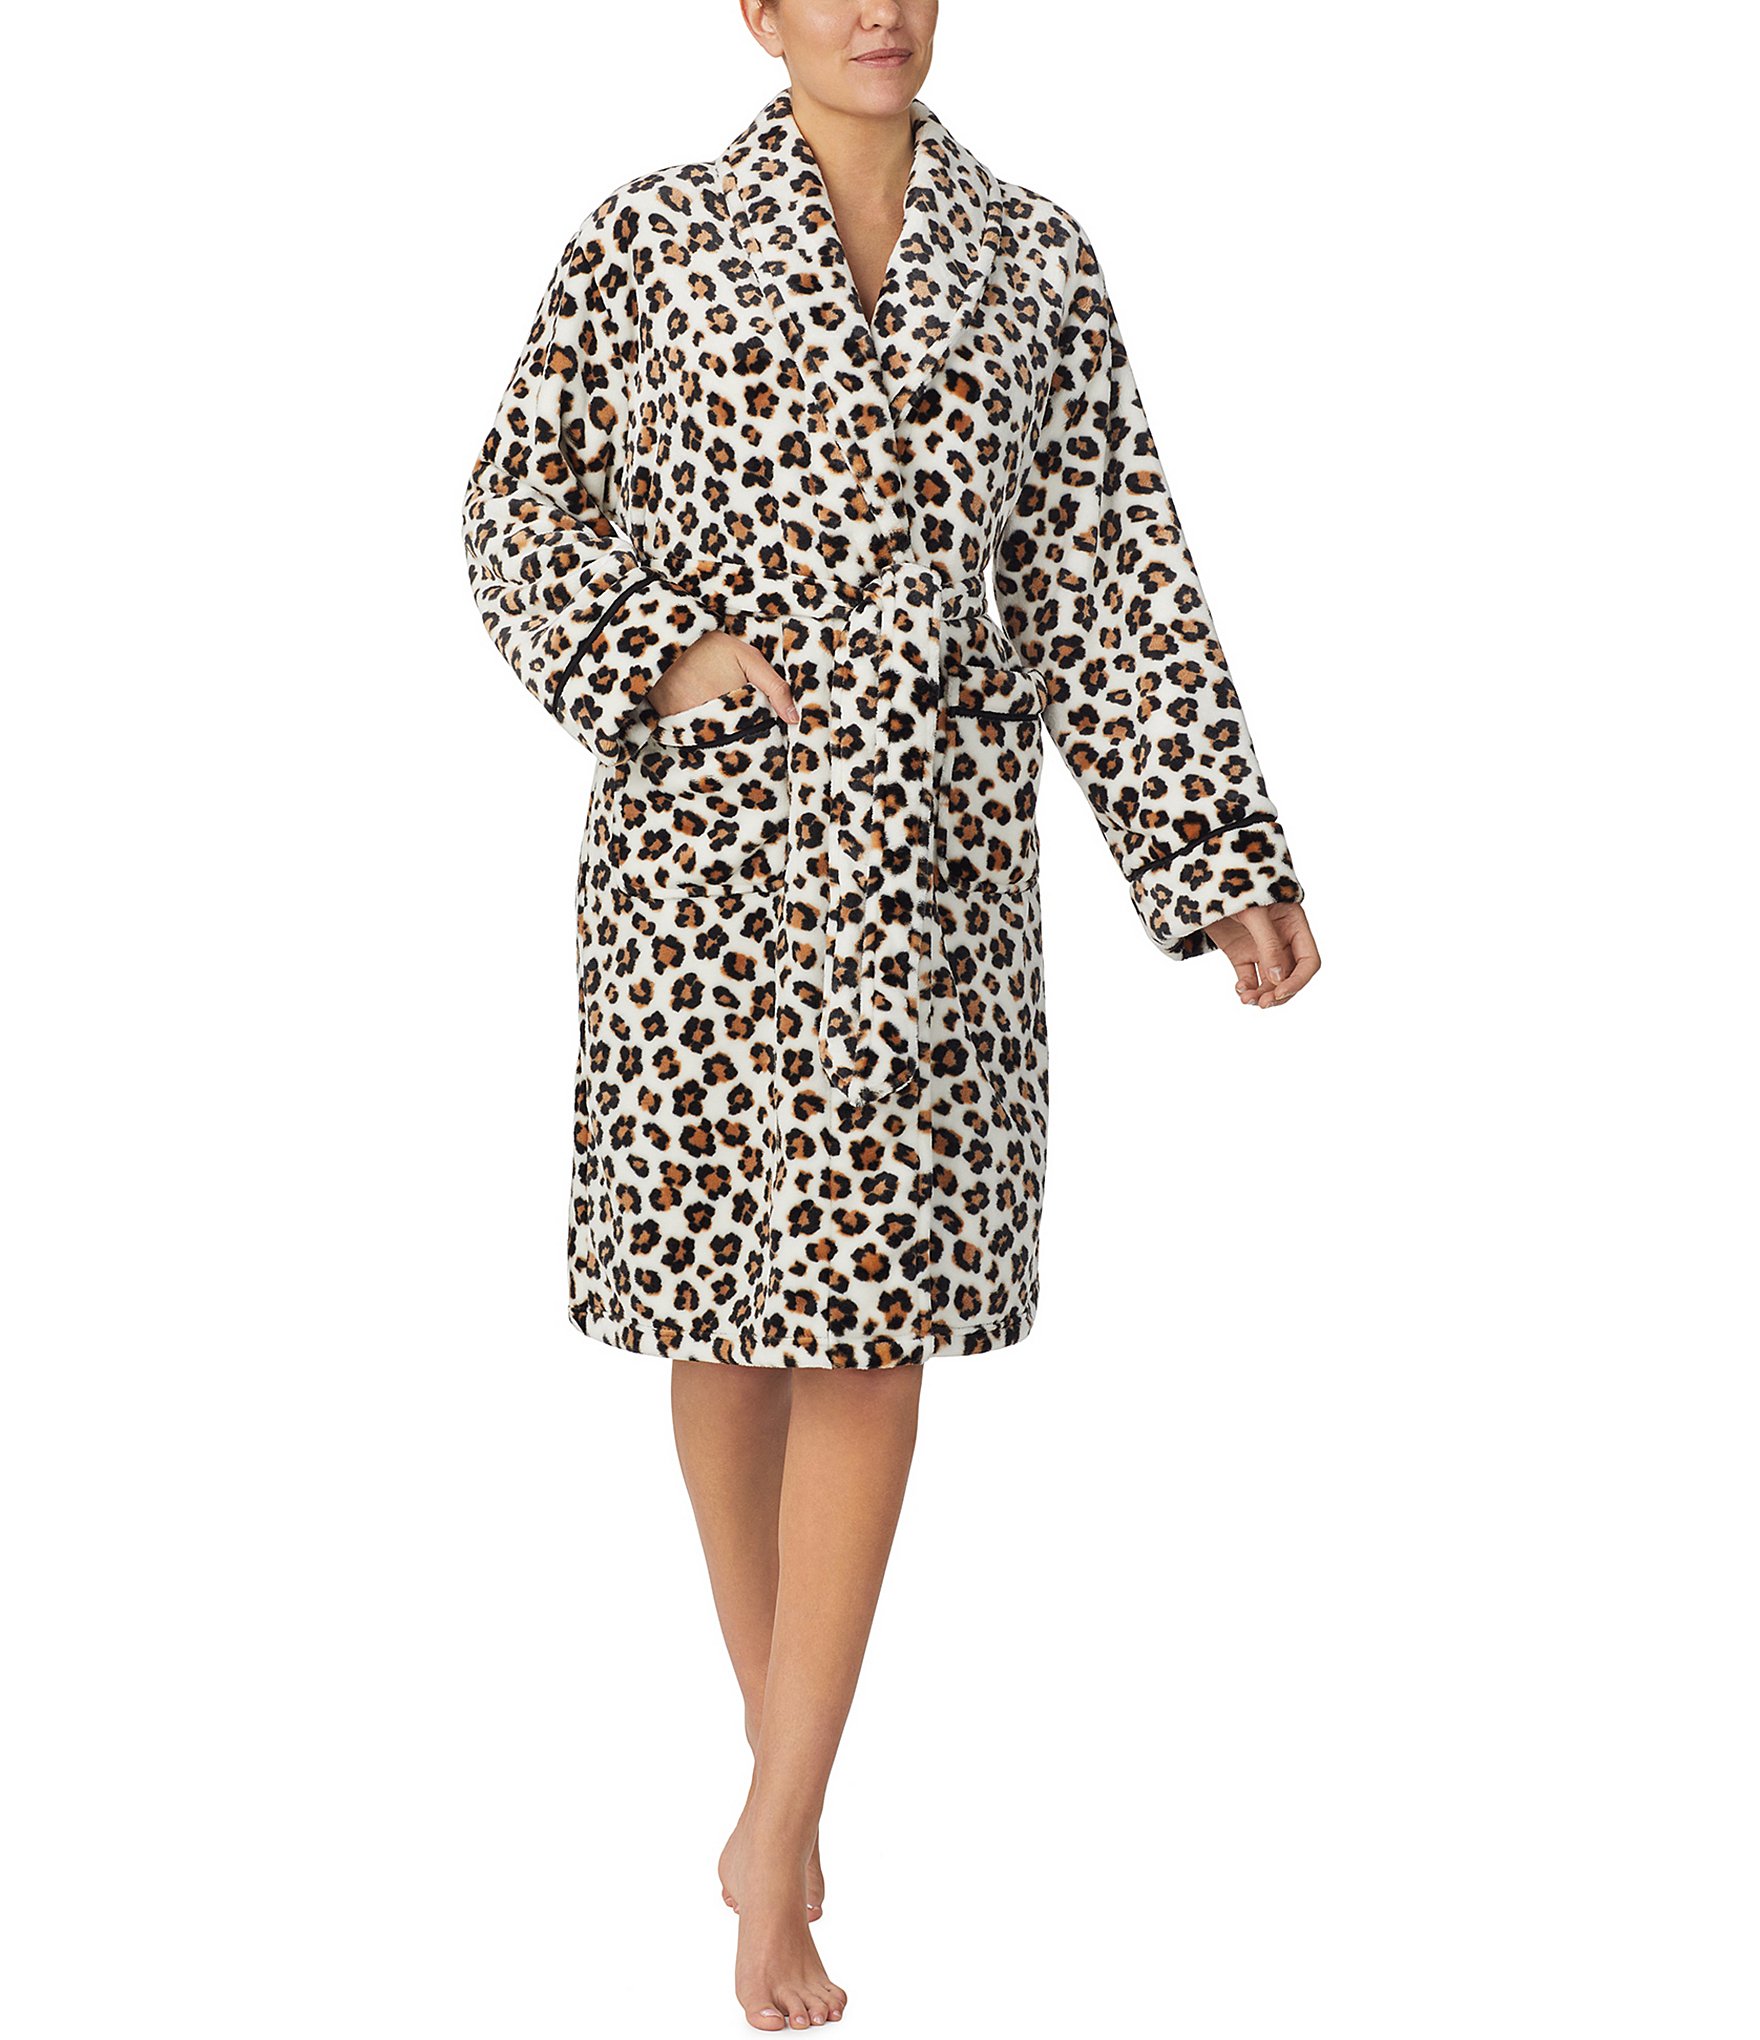 Leopard Print Gifts Leopard Print Bridesmaid Robes Bachelorette Party Robes  Leopard Print Robes Monogrammed Trendy Gifts for Women EB3376M 